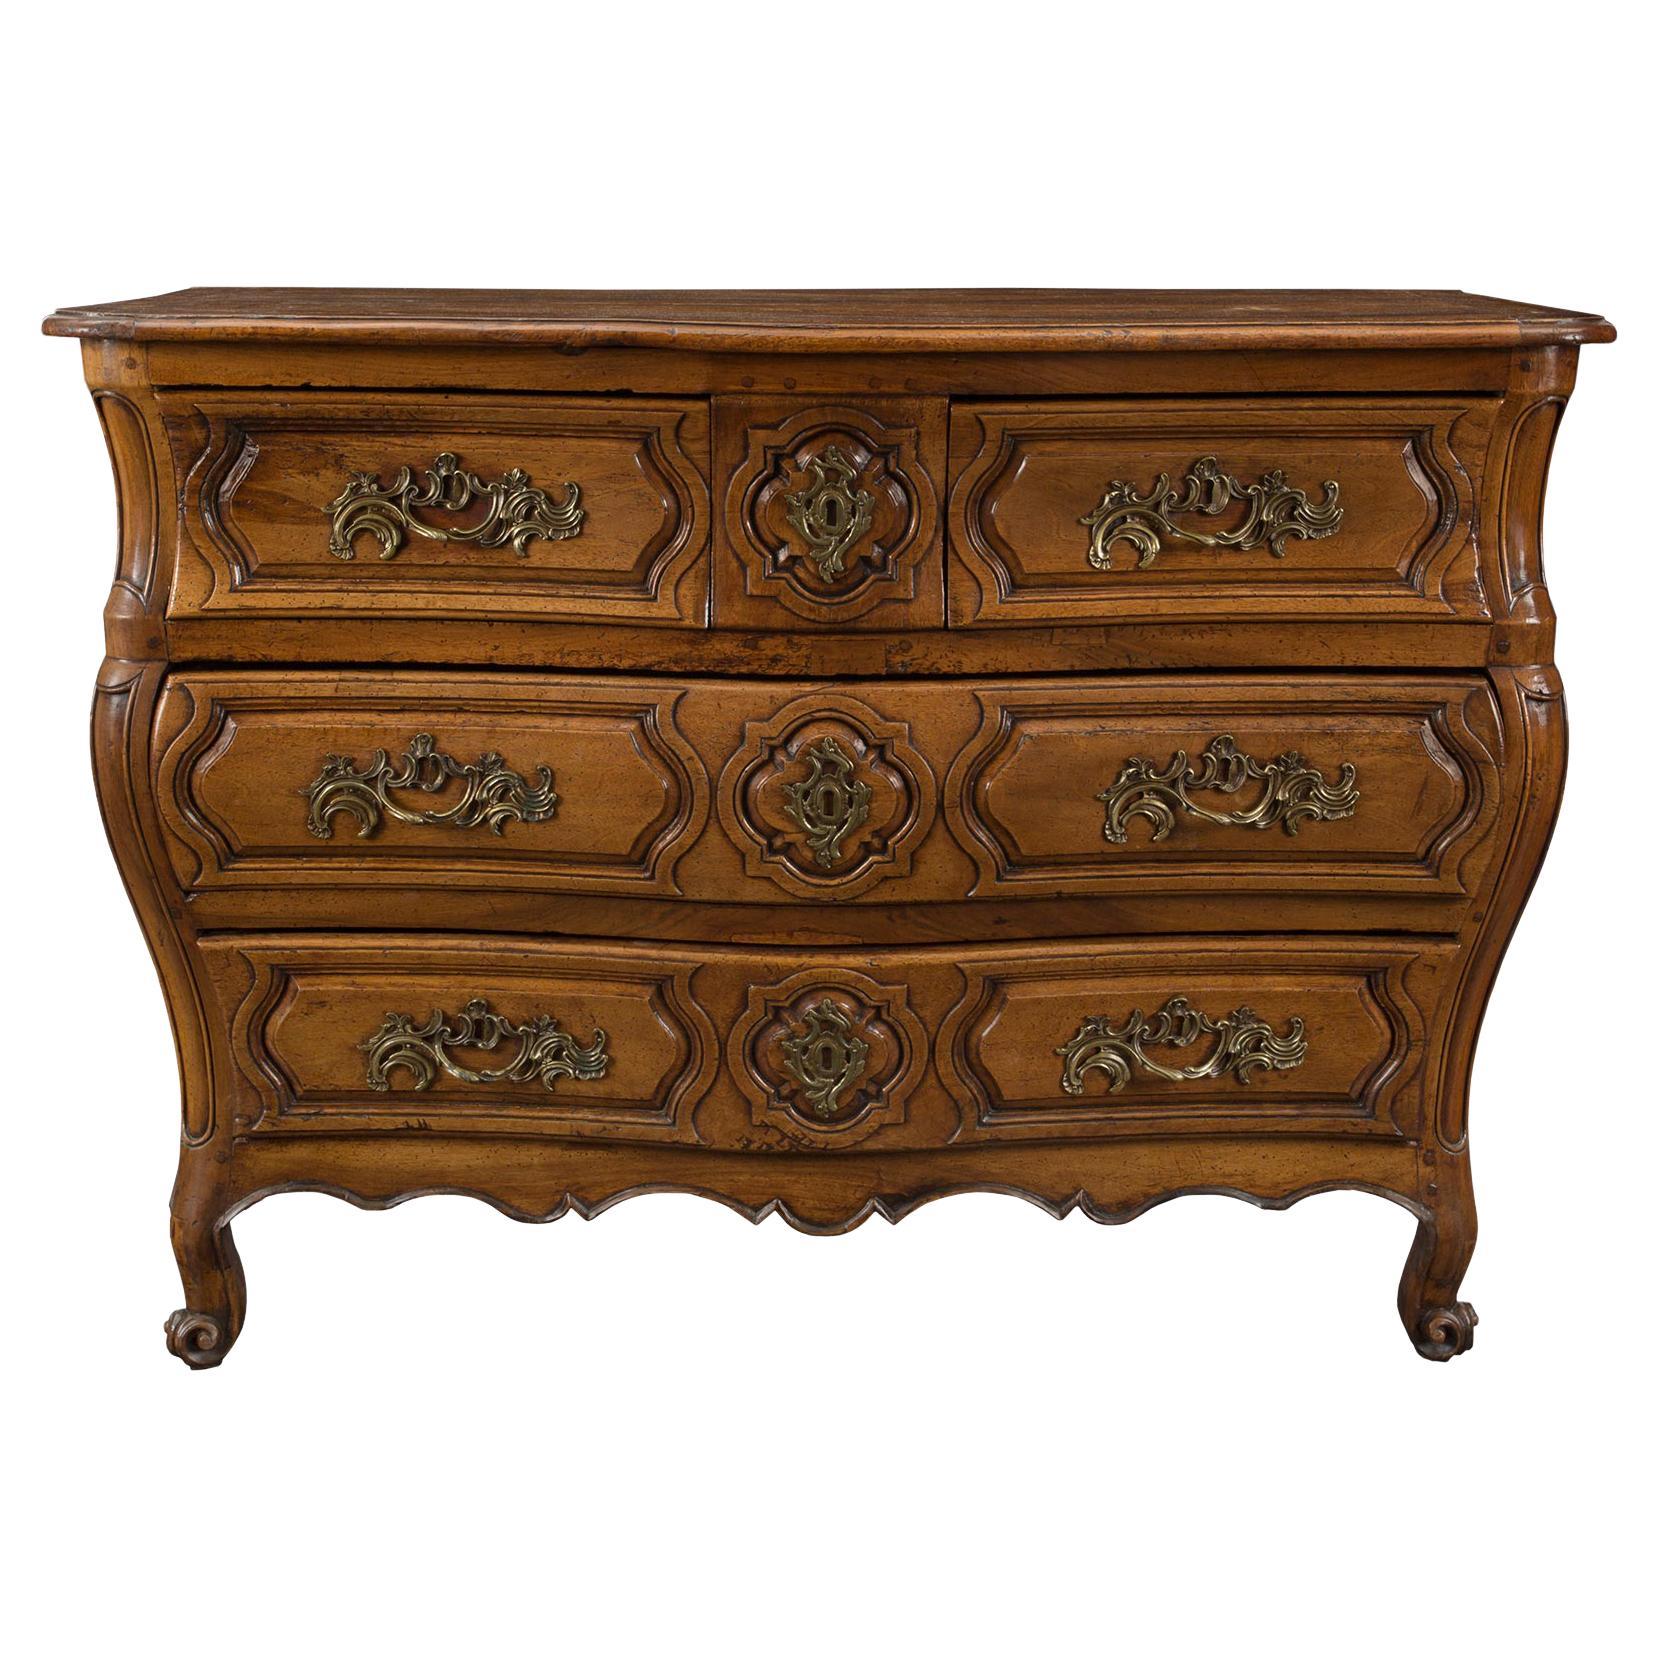 French Mid-18th Century Louis XV Period Walnut Commode with Bronze Hardware For Sale